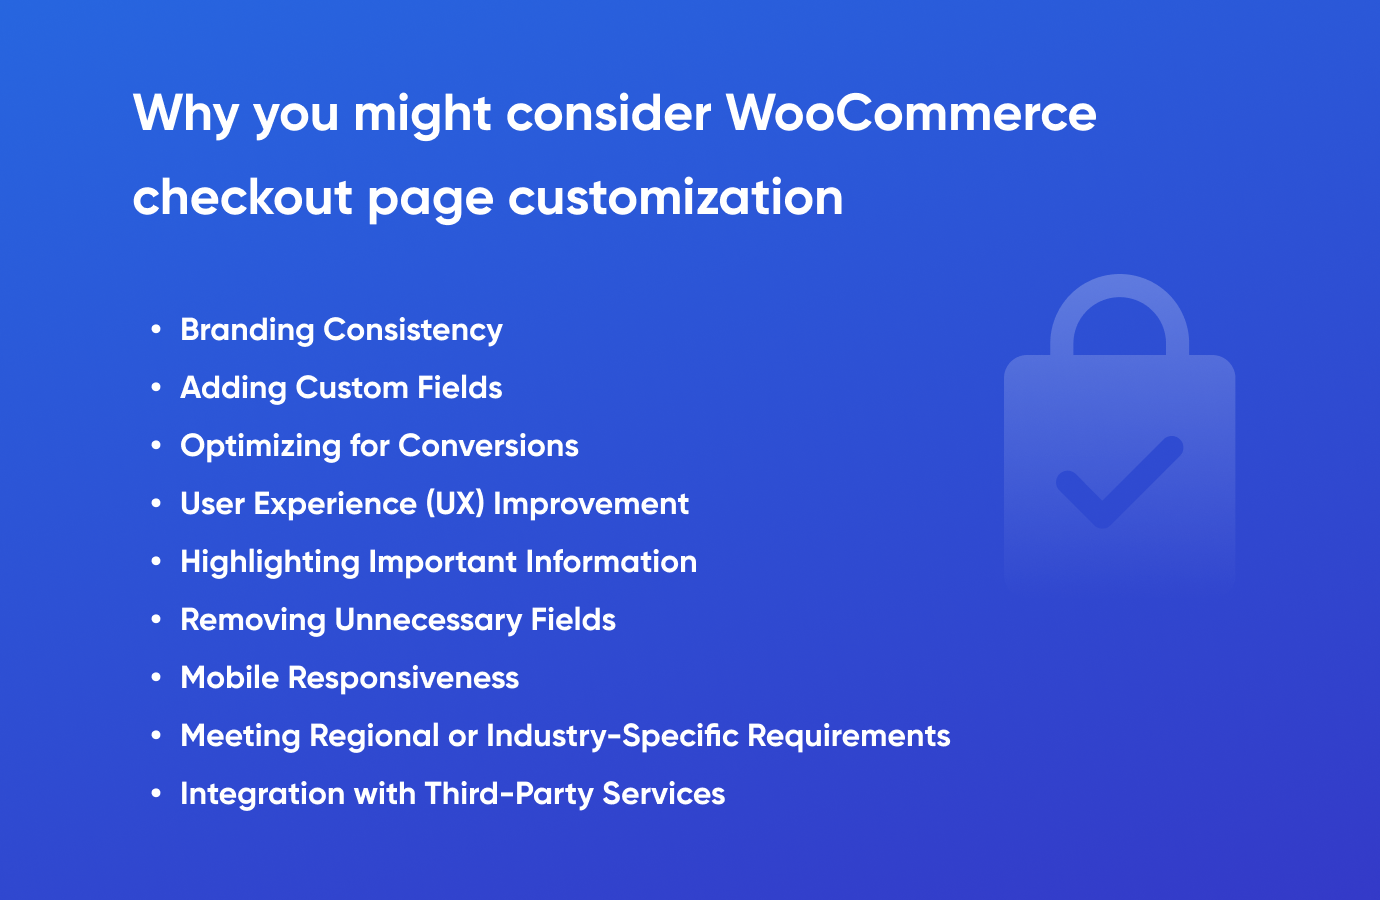 why you might consider WooCommerce checkout page customization.